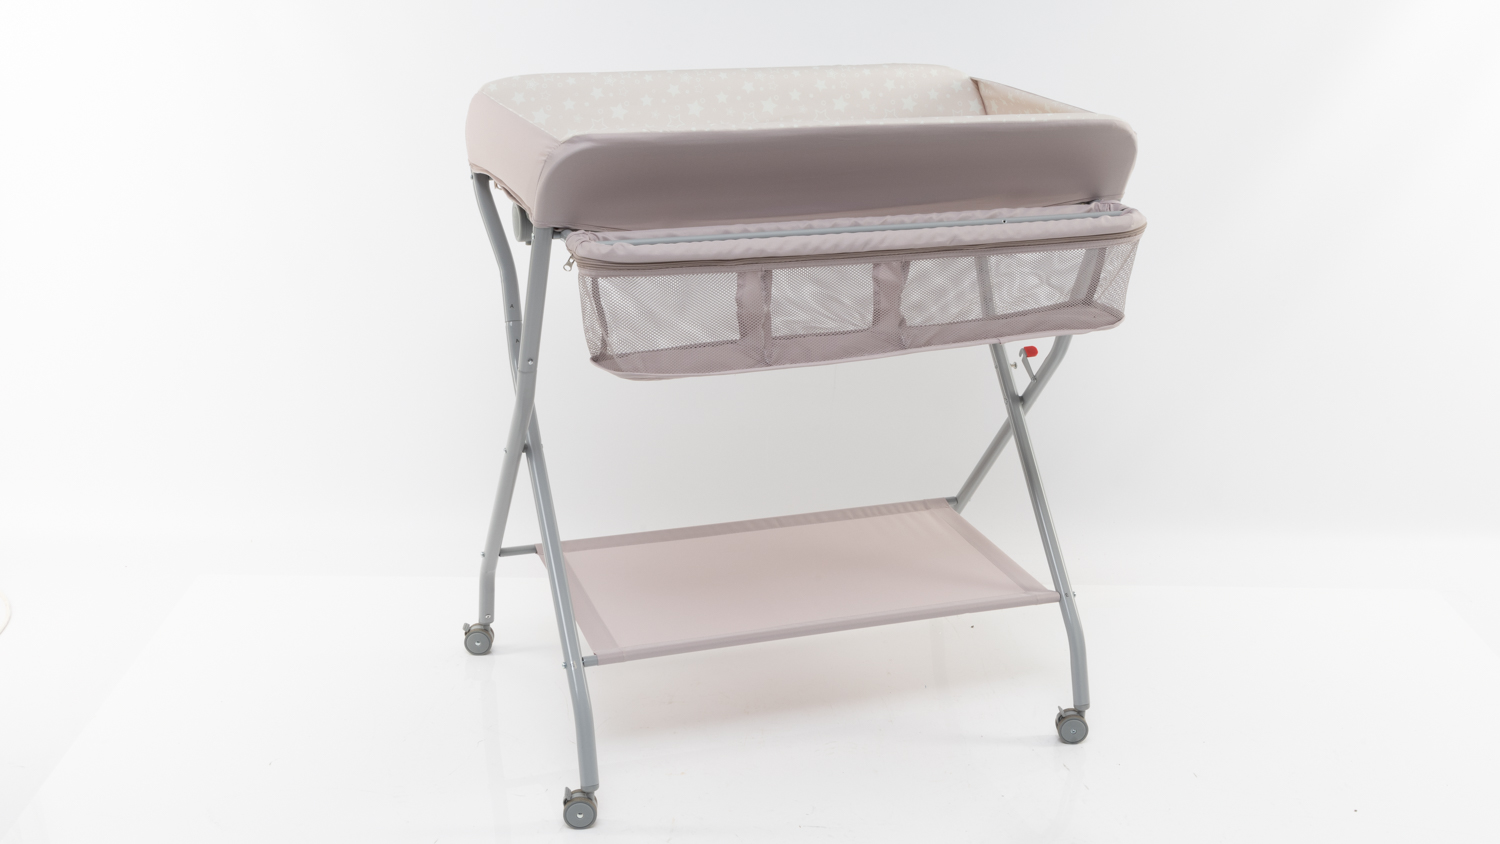 Baby Joy Baby Changing Table AG10001 carousel image